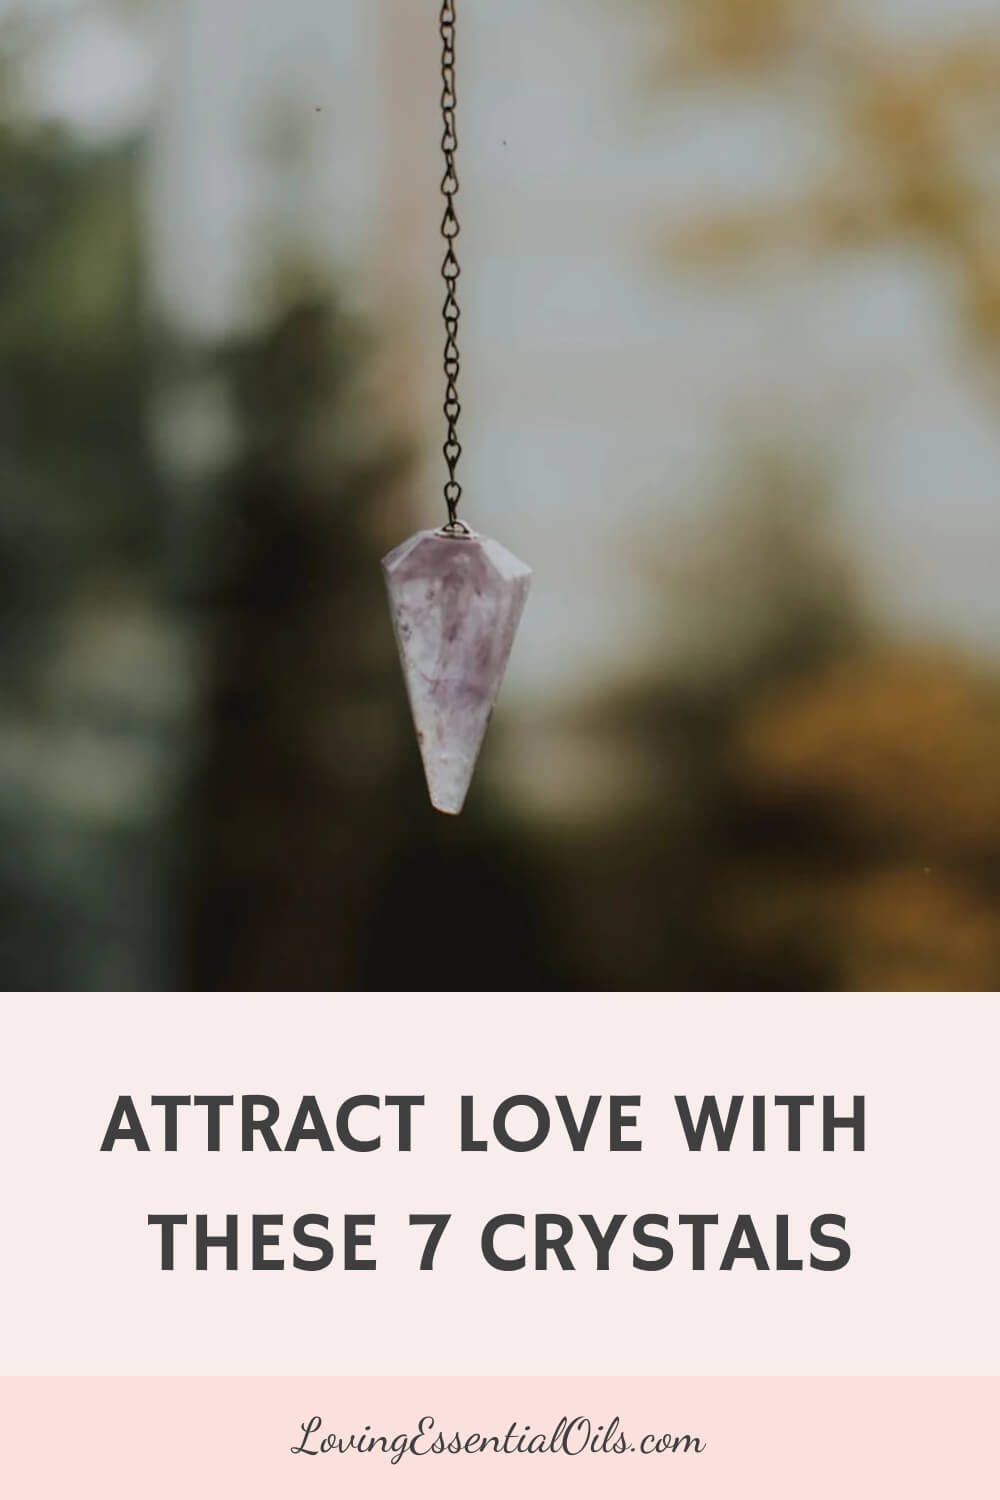 Attract Love with These 7 Crystals